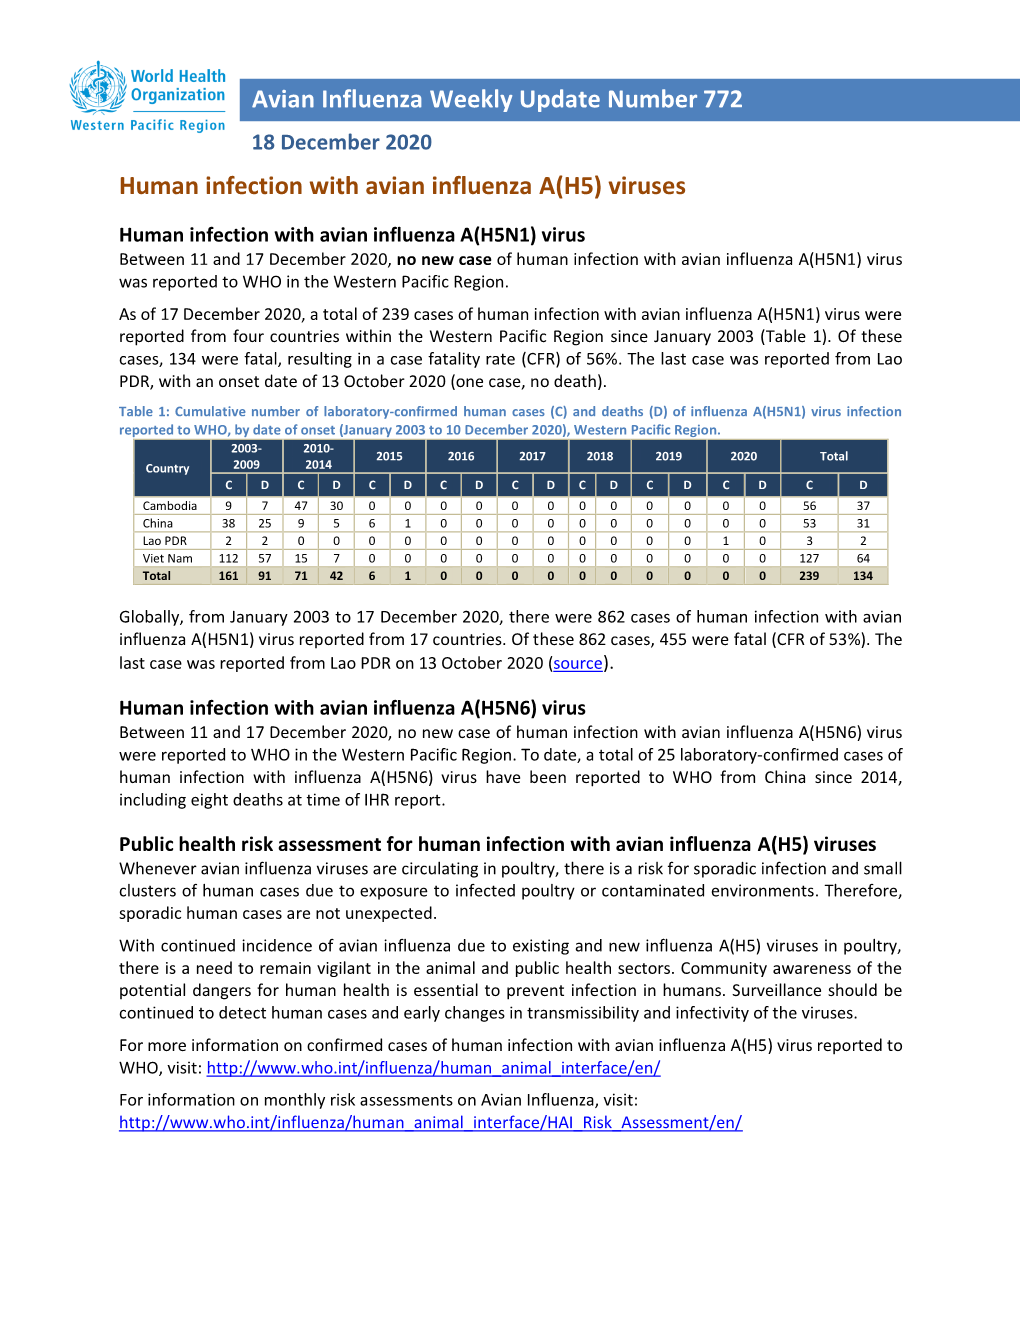 Avian Influenza Weekly Update Number 772 Human Infection With